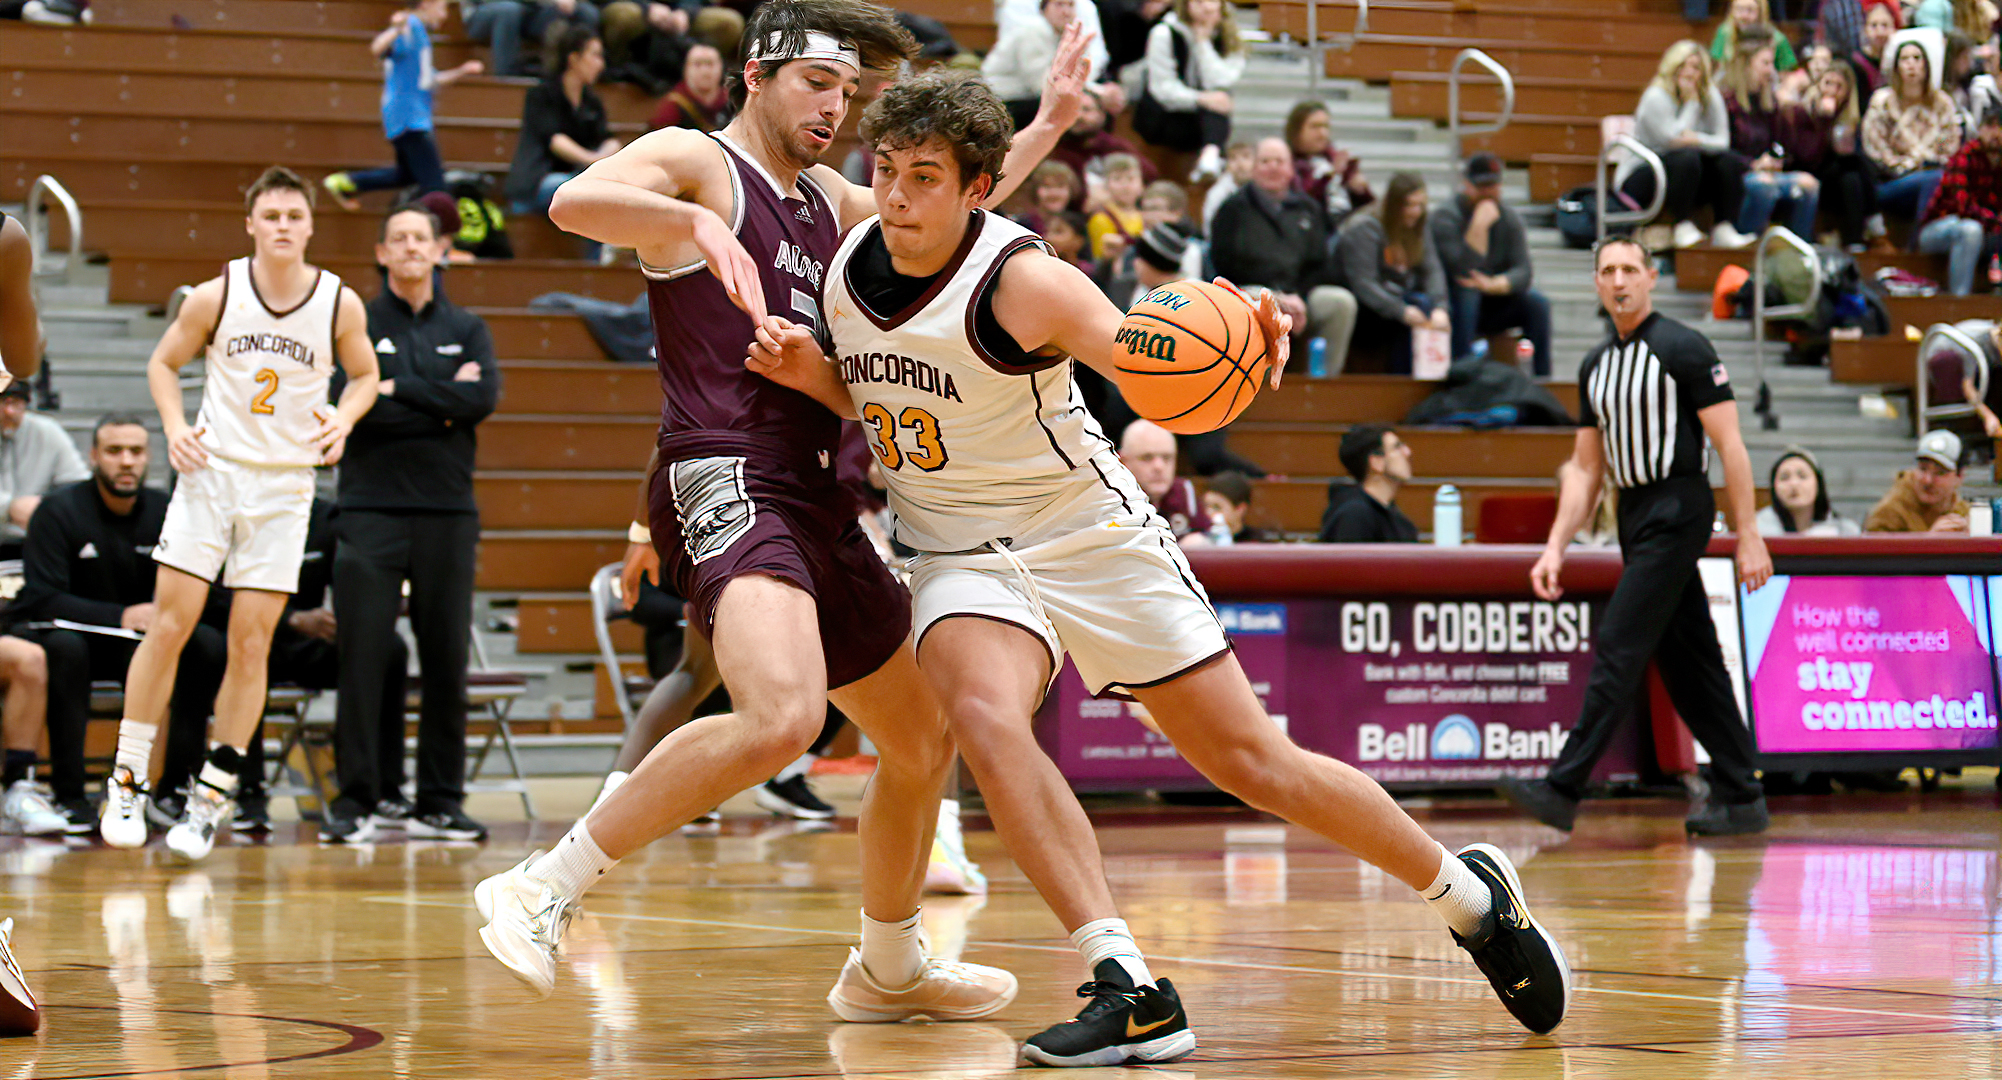 Jacob Cook drives to the hoop for two of his season-high 22 points in the Cobbers' win over Augsburg.